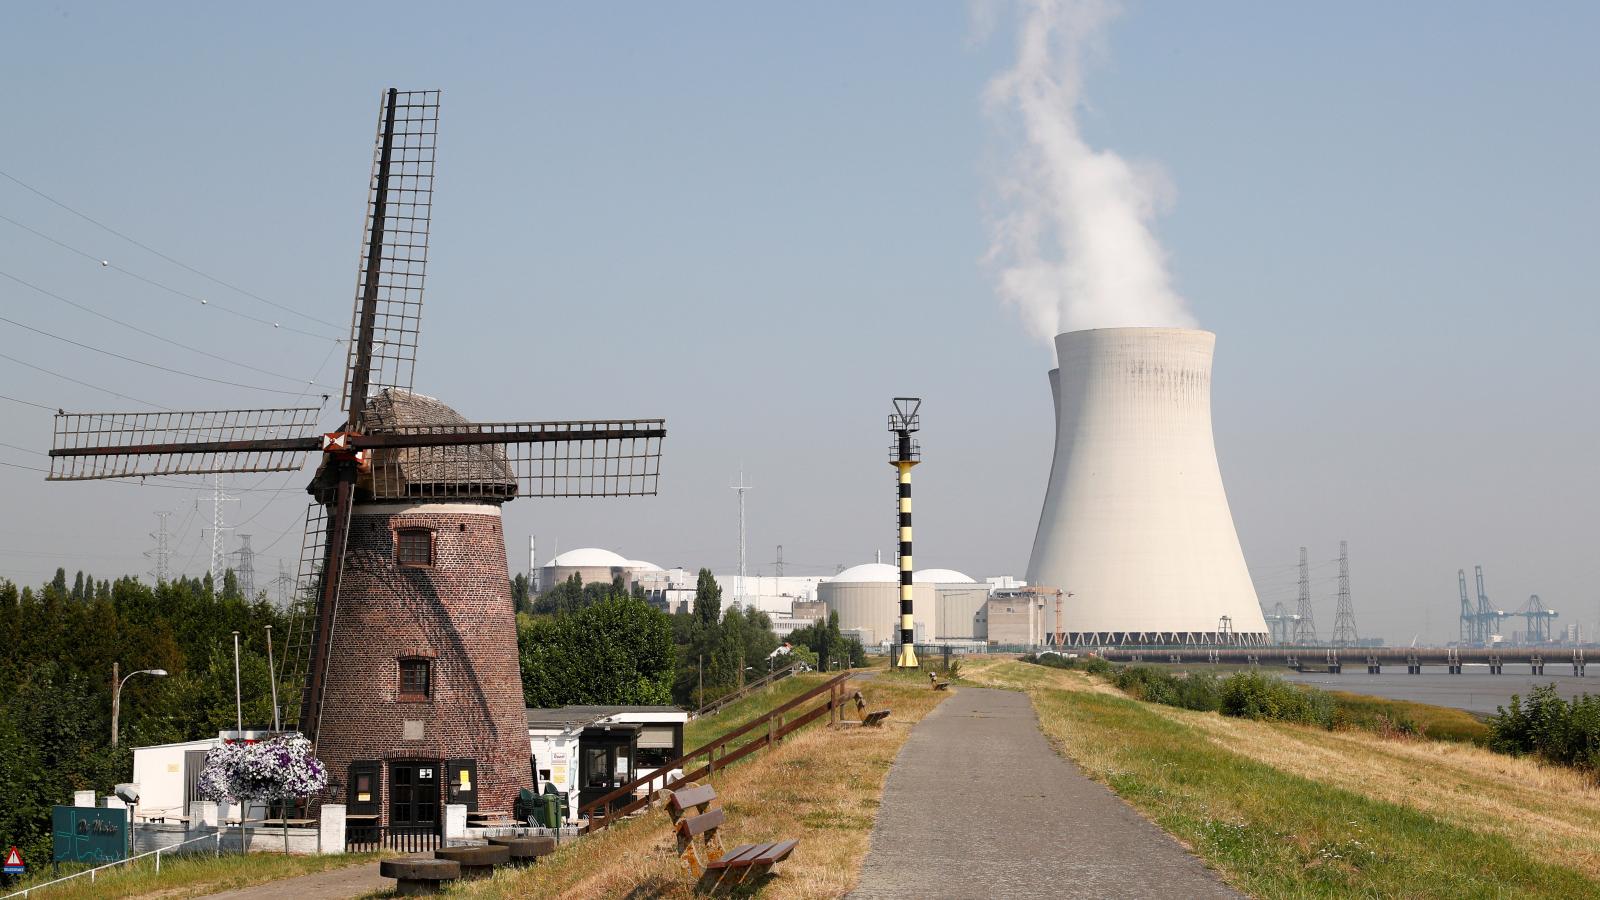 Europe's heatwave is forcing nuclear power plants to shut down